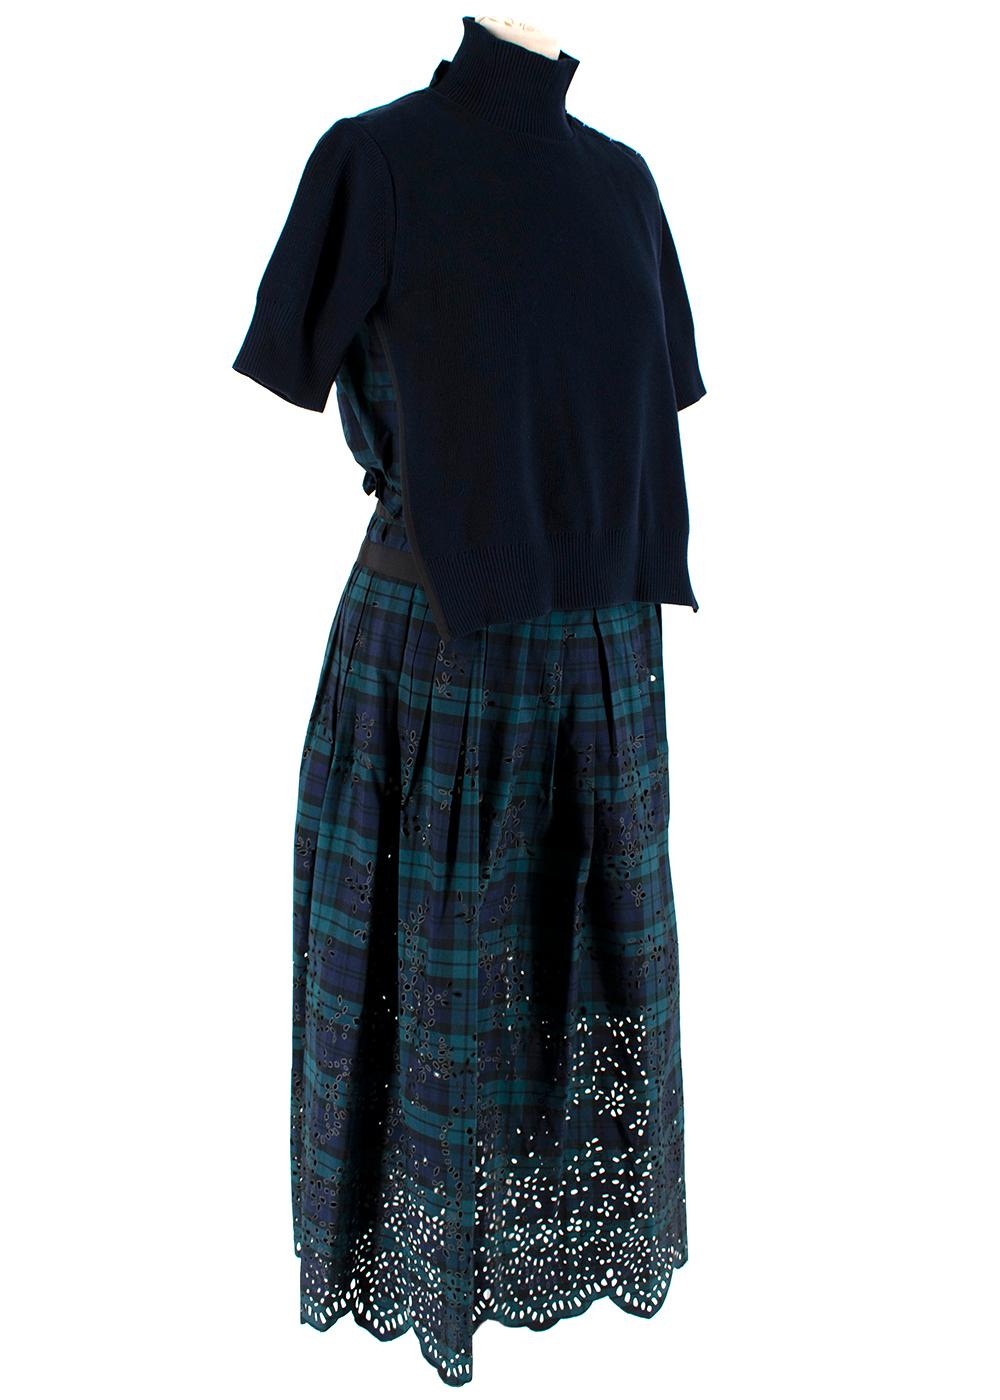 Sacai Navy Knitted & Tartan Dress

- Tartan design on the skirt with green and navy hues
- Ribbed navy knitted top with high neckline
- Cropped sleeves
- Black ribbed ribbon hemlines
- Cobalt blue button fasten on the top 
- Skirt has laser cut leaf